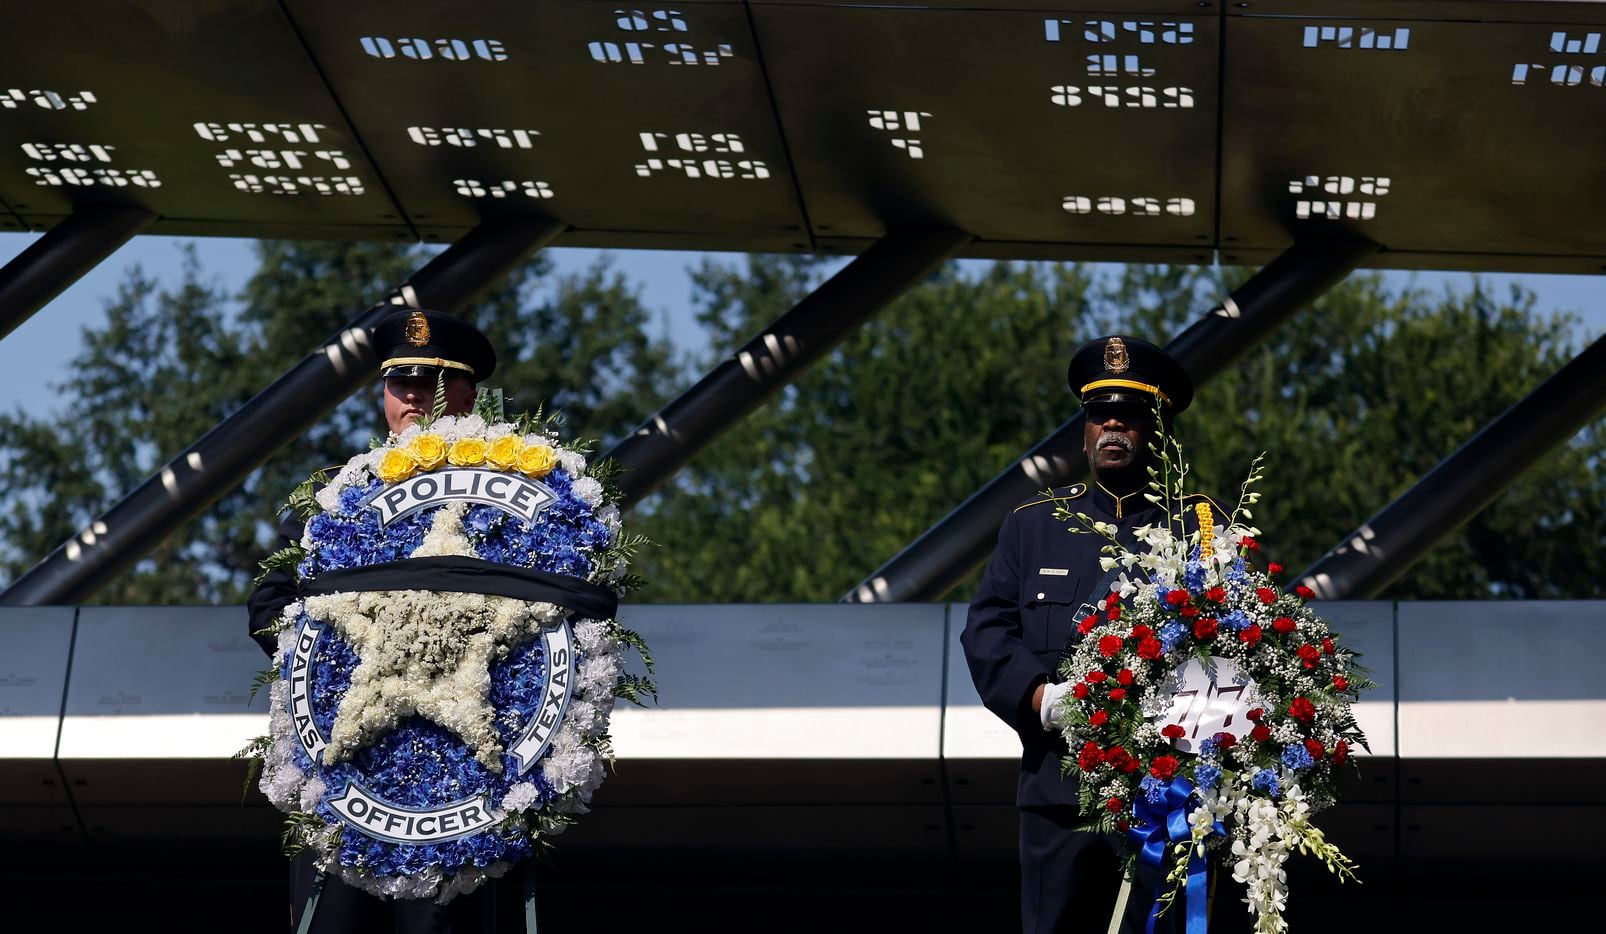 Dallas Police Department honored officers who died in the line of duty during the 2021 Police Memorial Day at the Dallas Police Memorial in downtown Dallas, Wednesday, July 7, 2021. Special recognition was given to the officers' families on the fifth anniversary of the July 7th ambush. (Tom Fox/The Dallas Morning News)